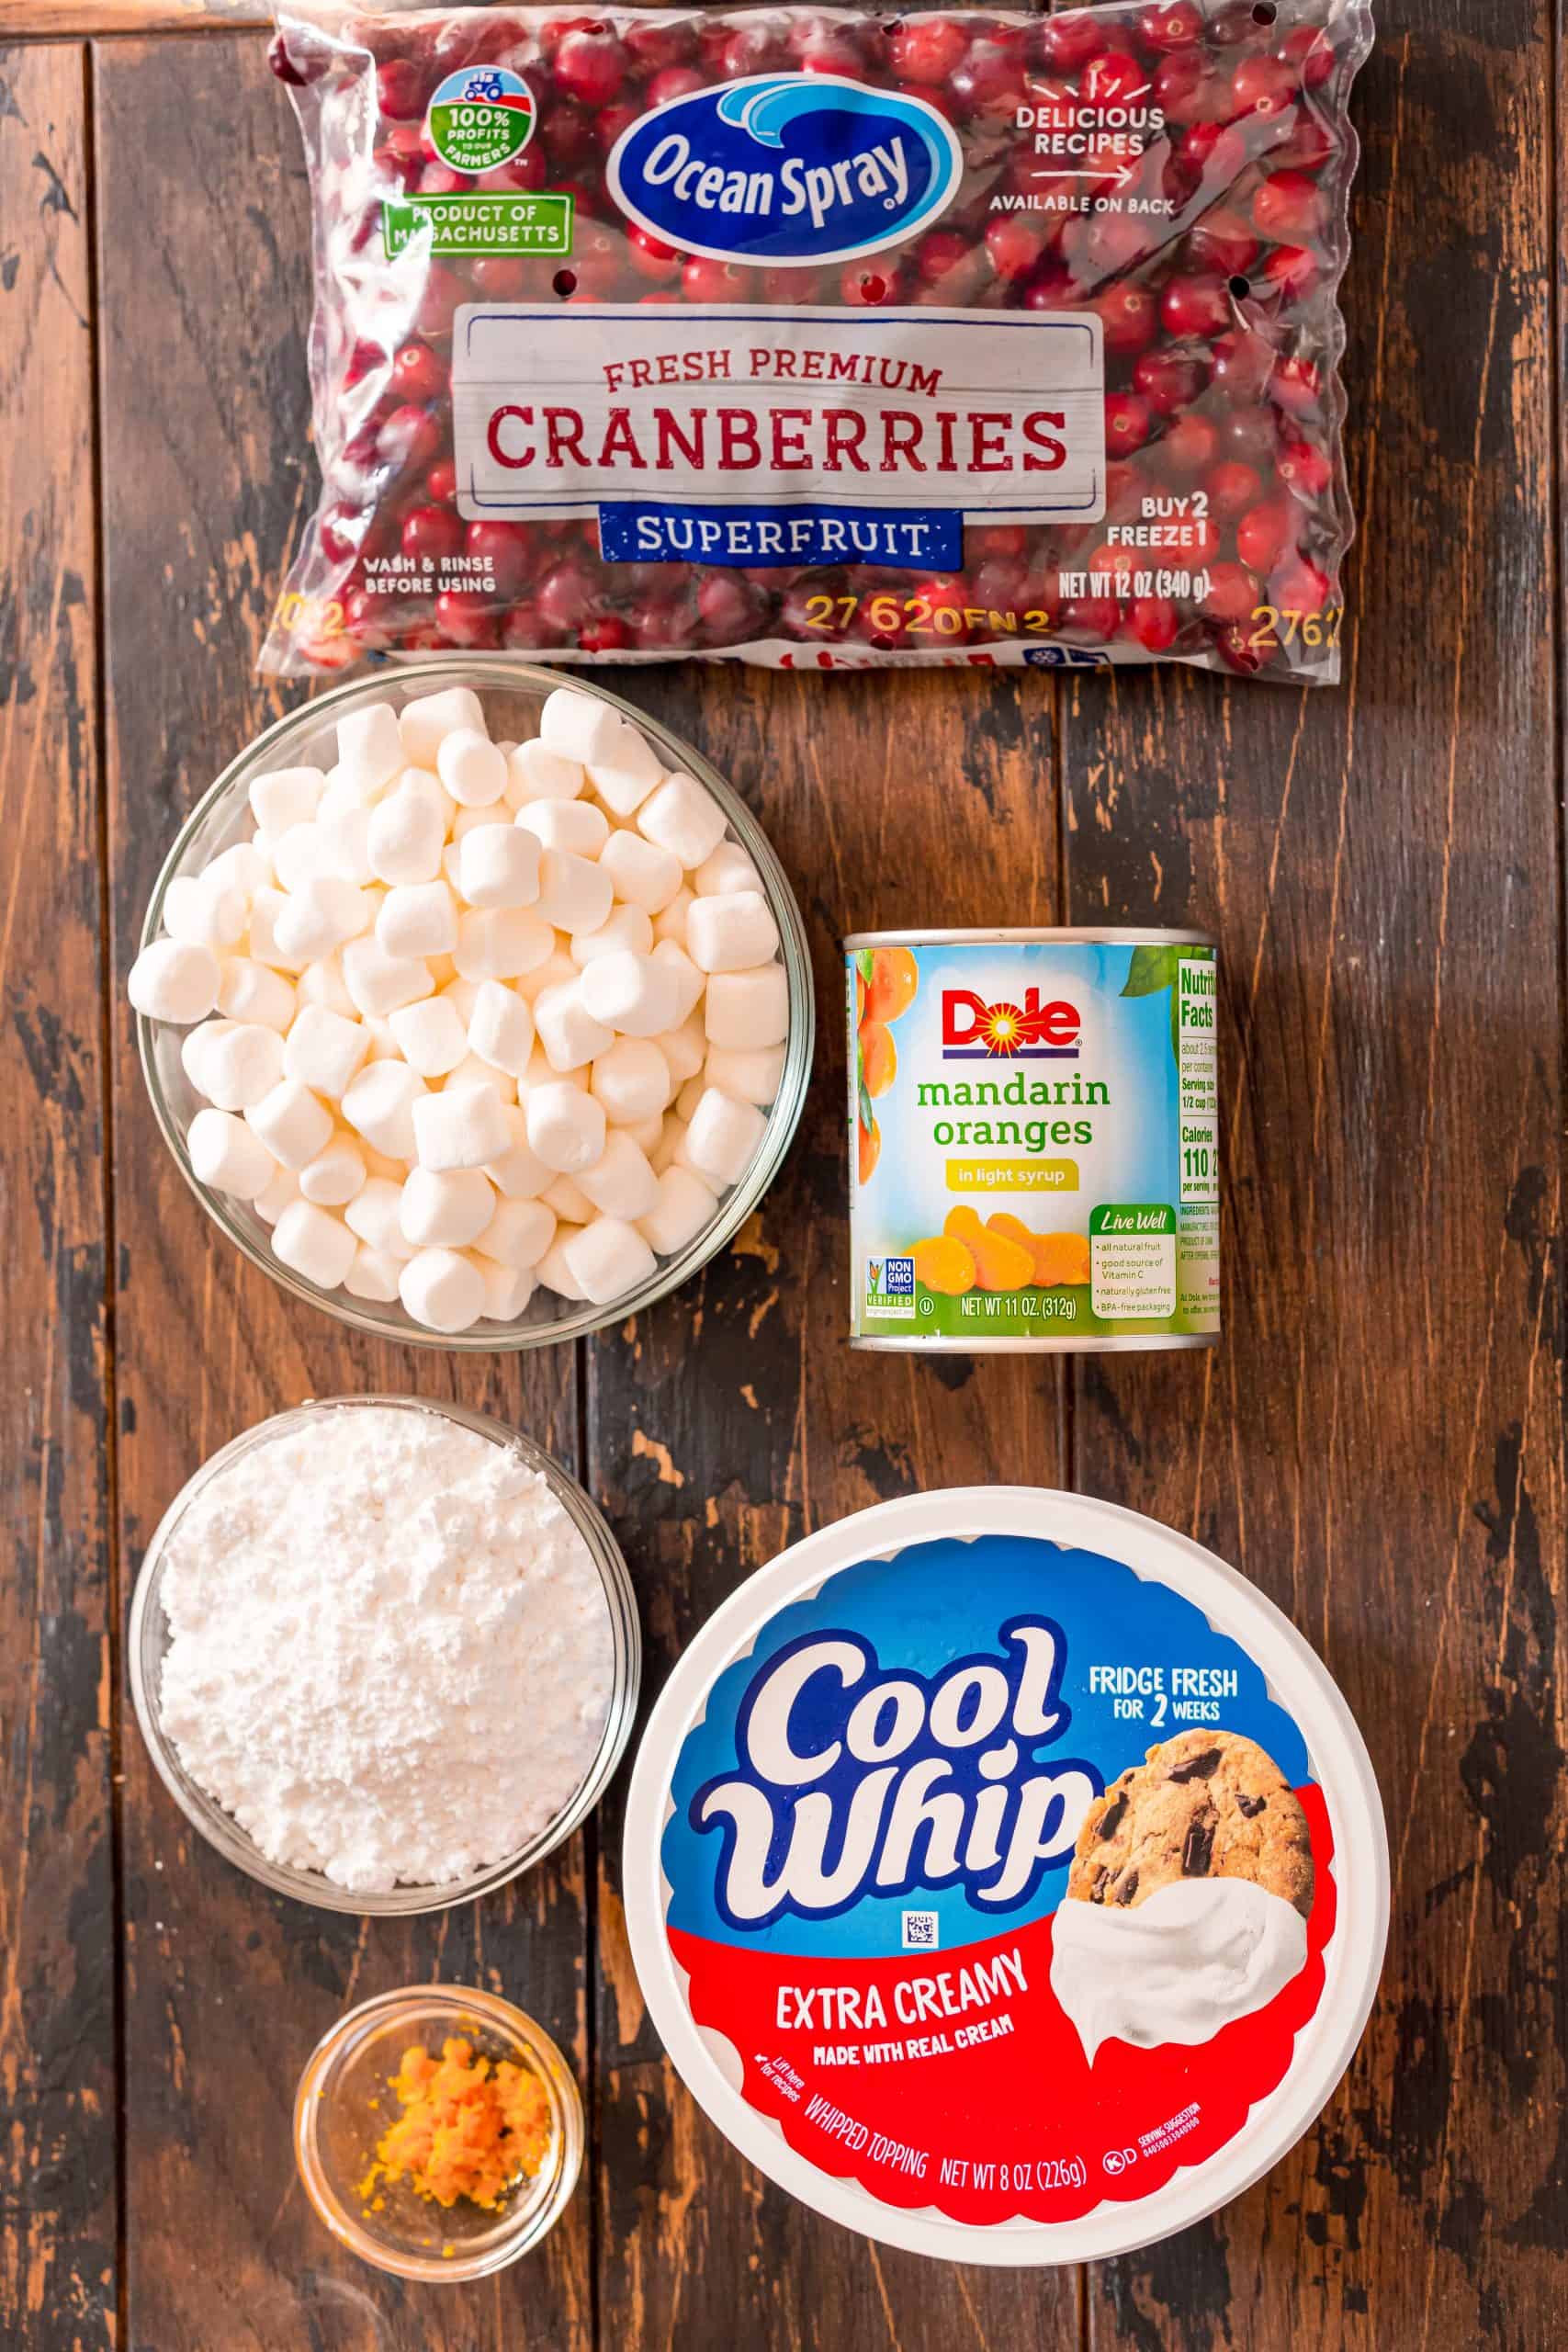 whole cranberries, can of mandarin oranges in light syrup, powdered sugar, orange zest, a tub of Extra Creamy Cool Whip, mini marshmallows.